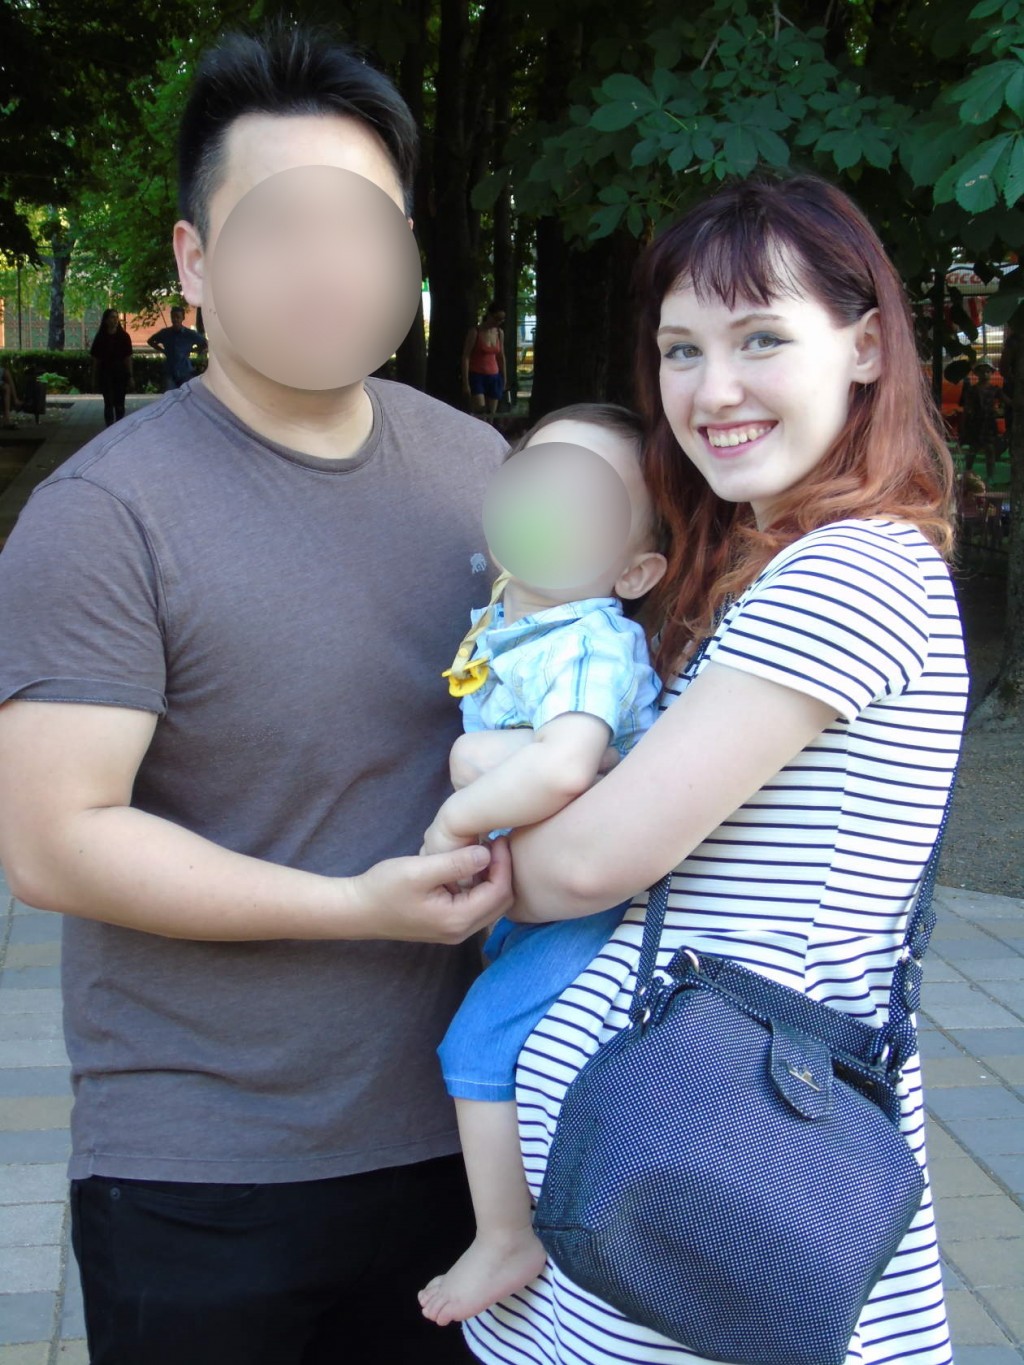 Russian woman fights for custody of son after Taiwanese family